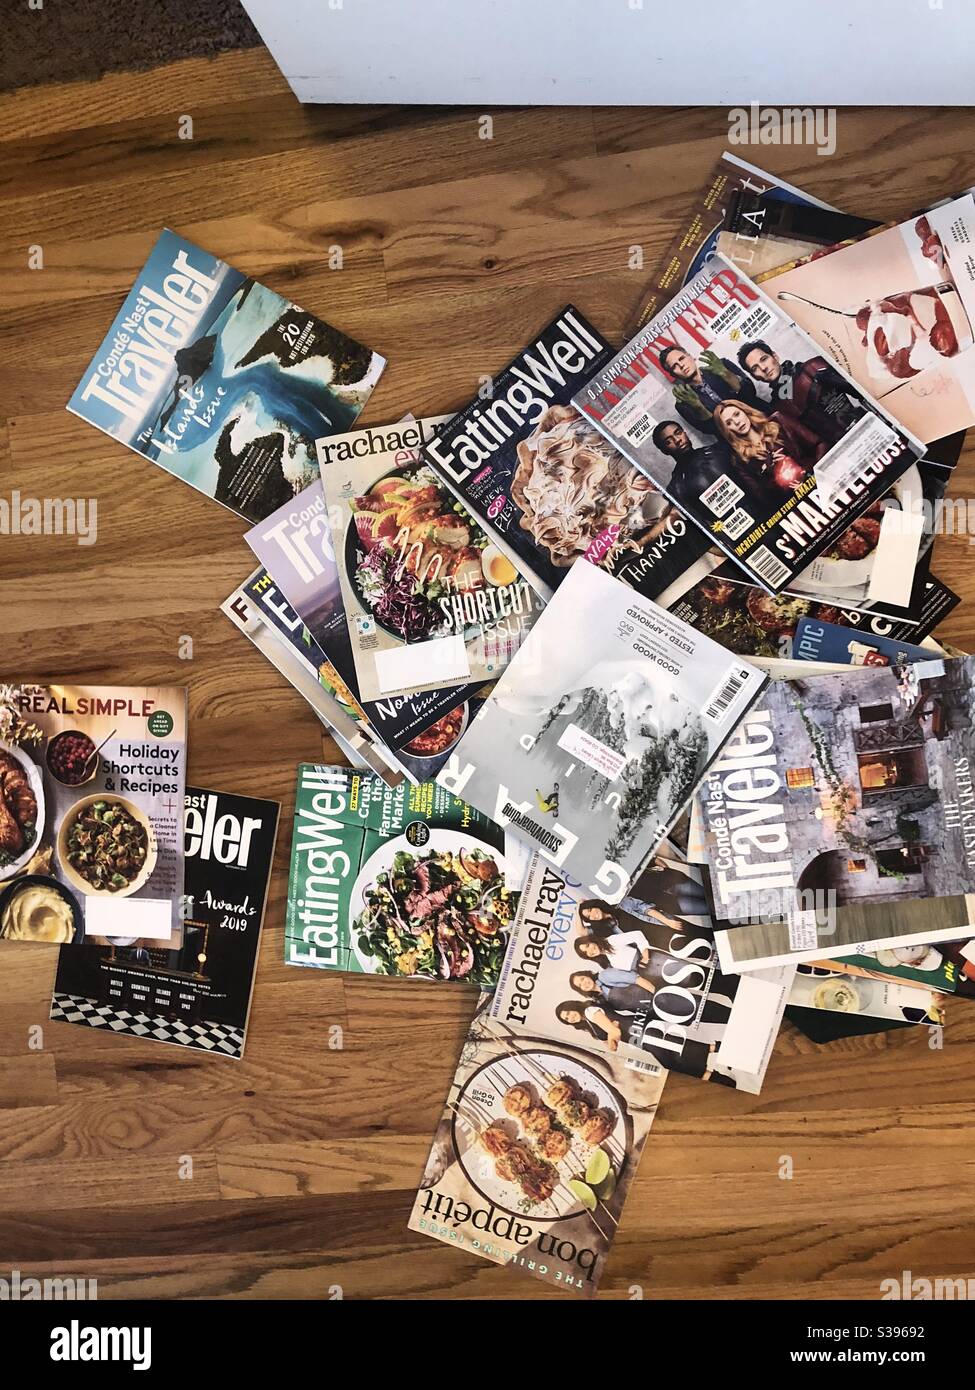 Pile of Old Magazines, Close-up View Stock Image - Image of communication,  brochure: 109564883